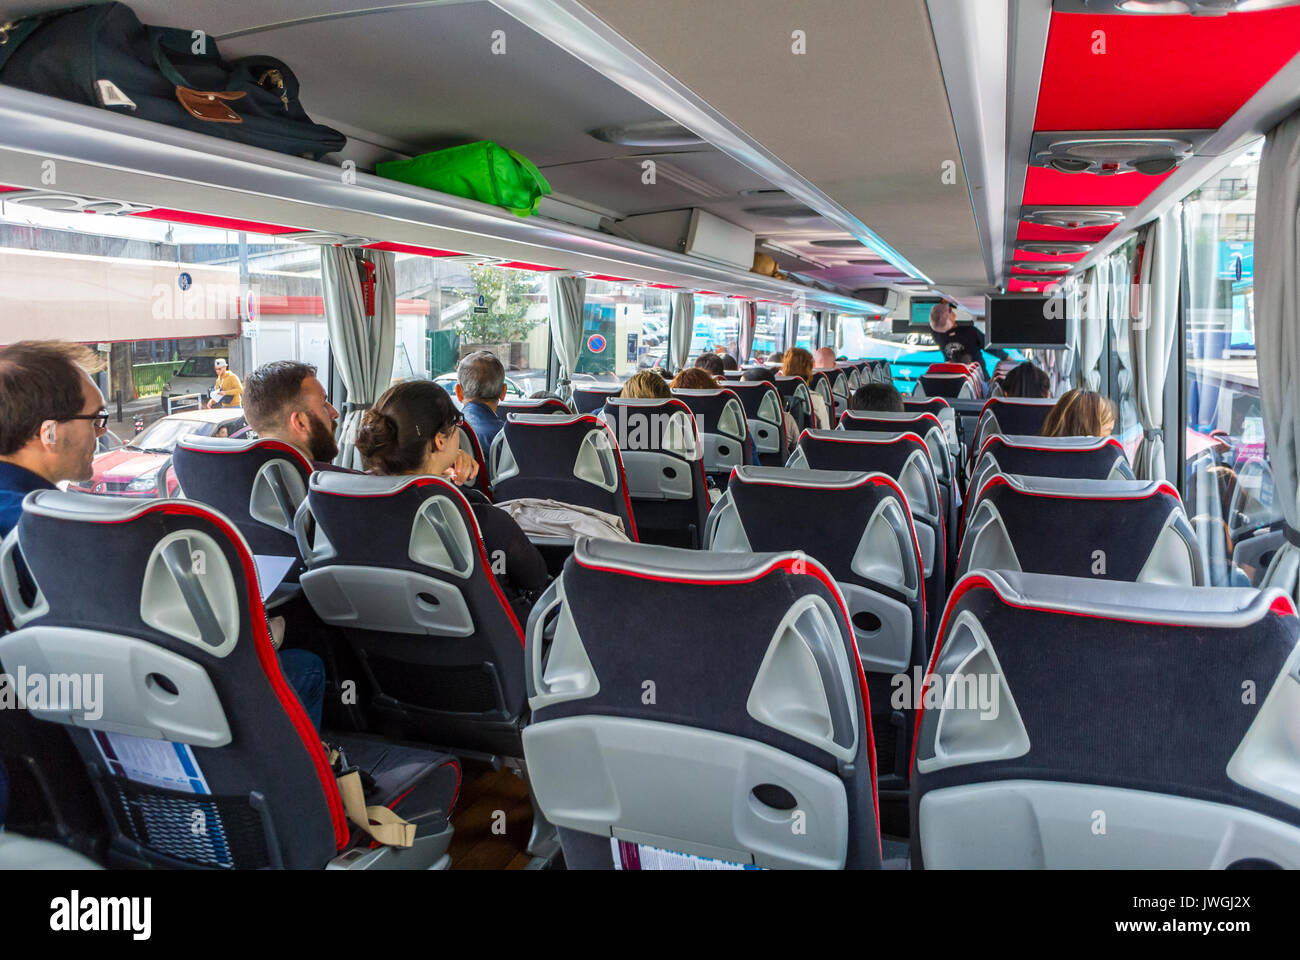 Paris, France, teens Tourists sitting on Low Cost DIscount Bus, Ouibus, contemporary interiors Stock Photo